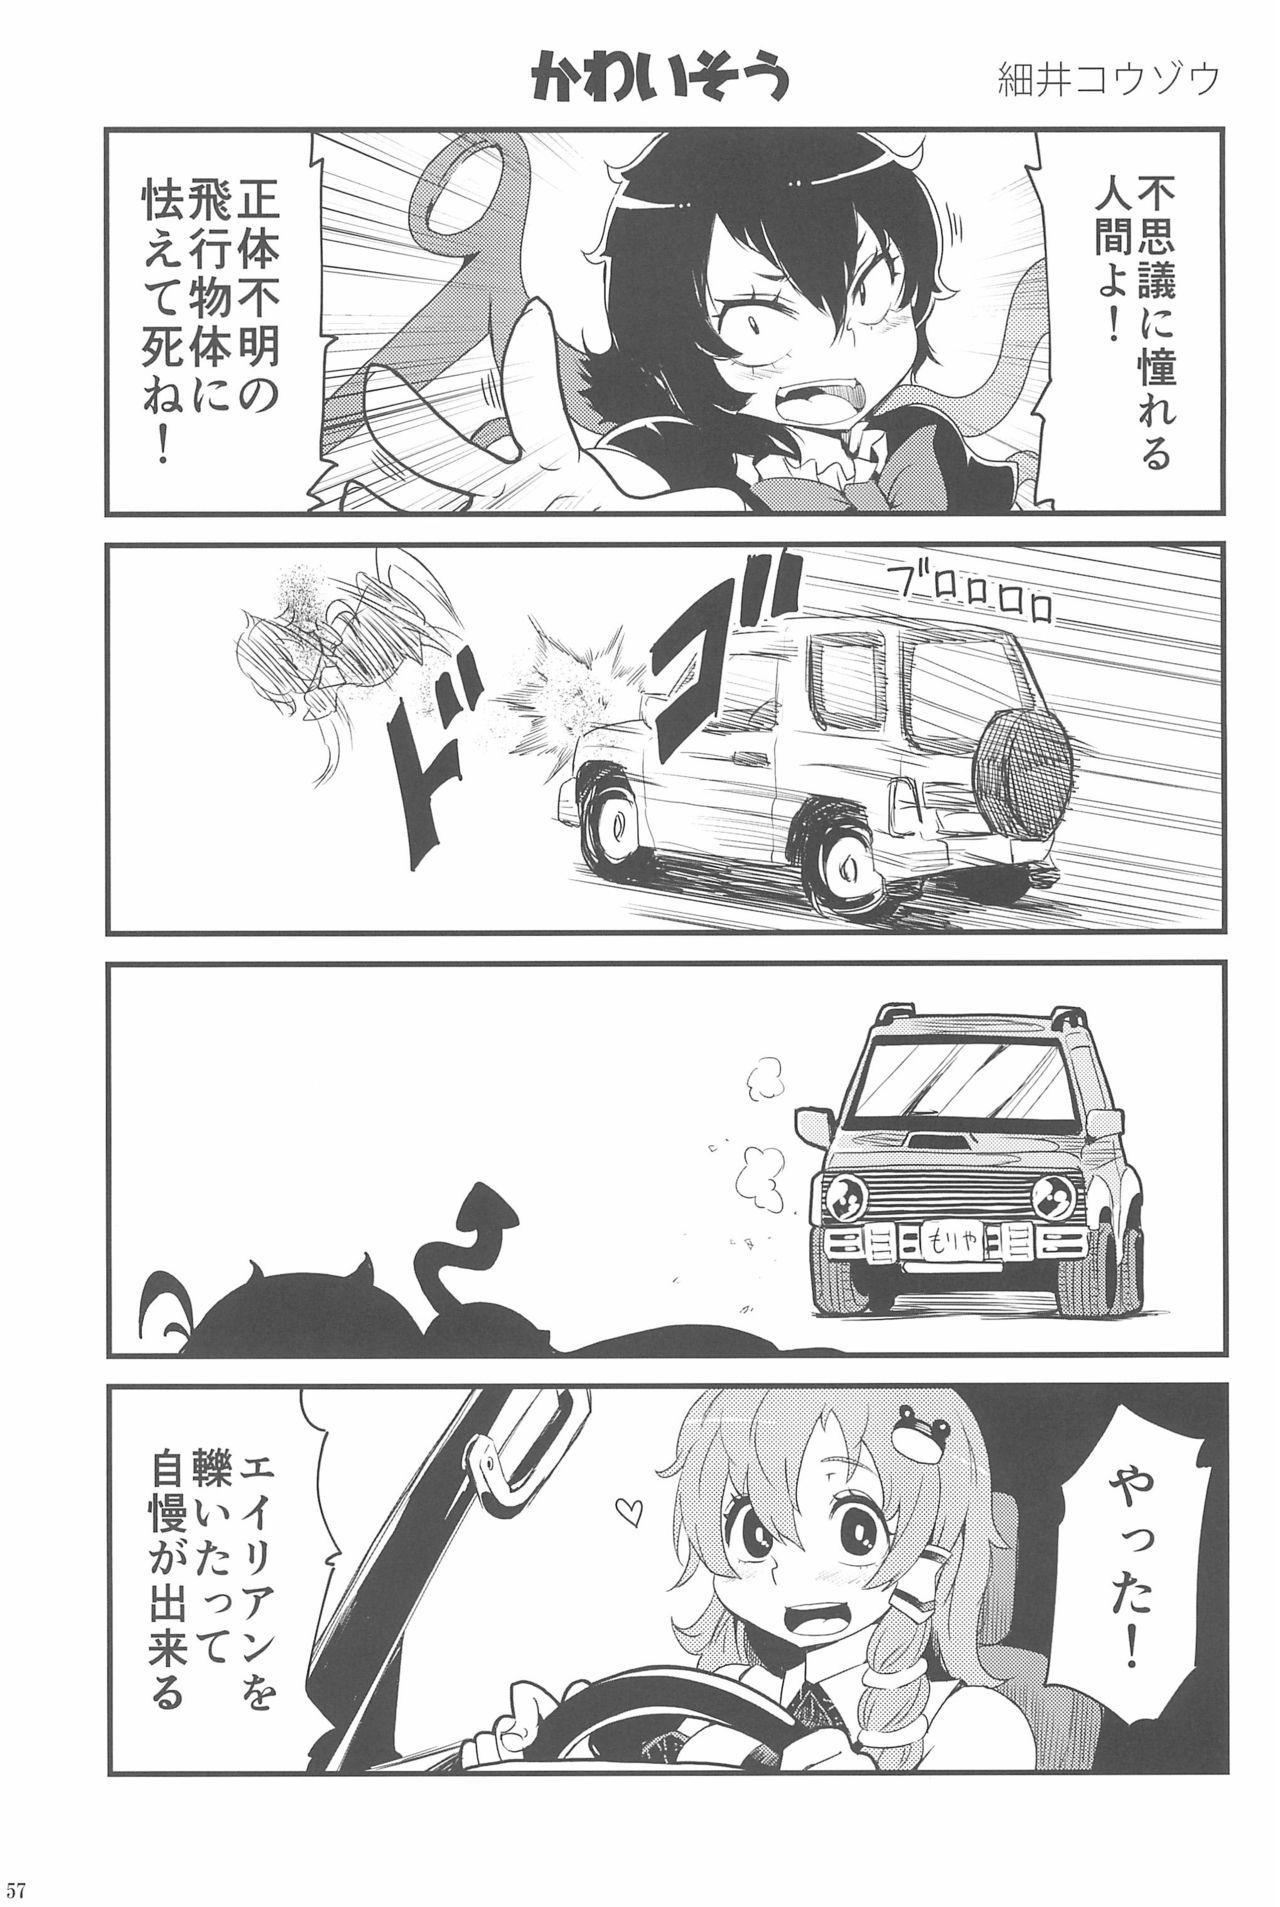 Touhou Roadkill Joint Publication 56